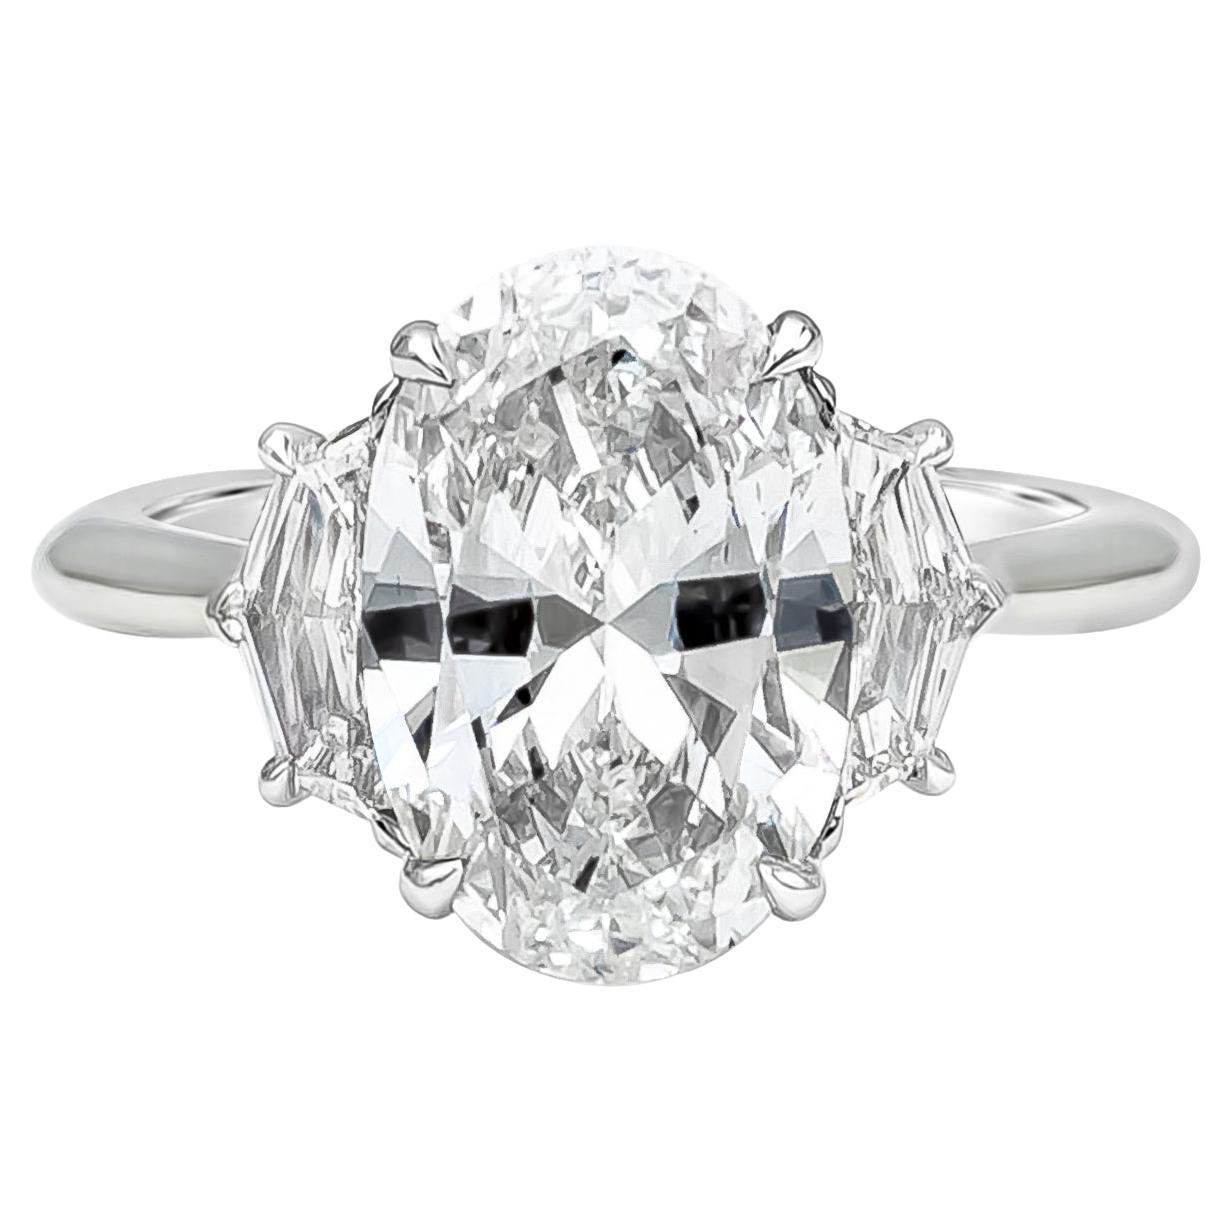 GIA Certified 4.02 Carat Oval Cut Diamond Three-Stone Engagement Ring